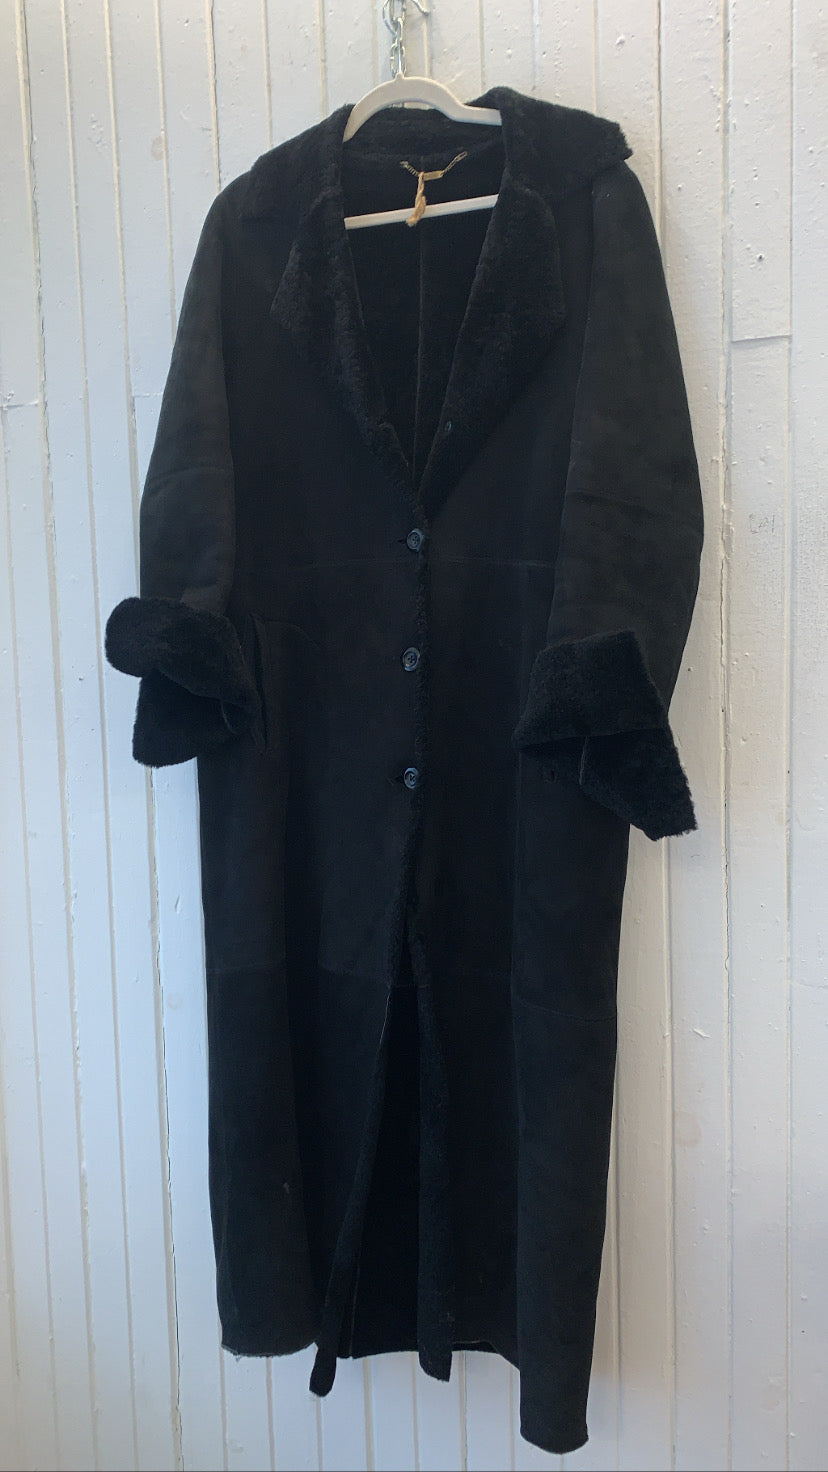 LUXURY CONSIGNMENT - Longline Black Shearling Coat